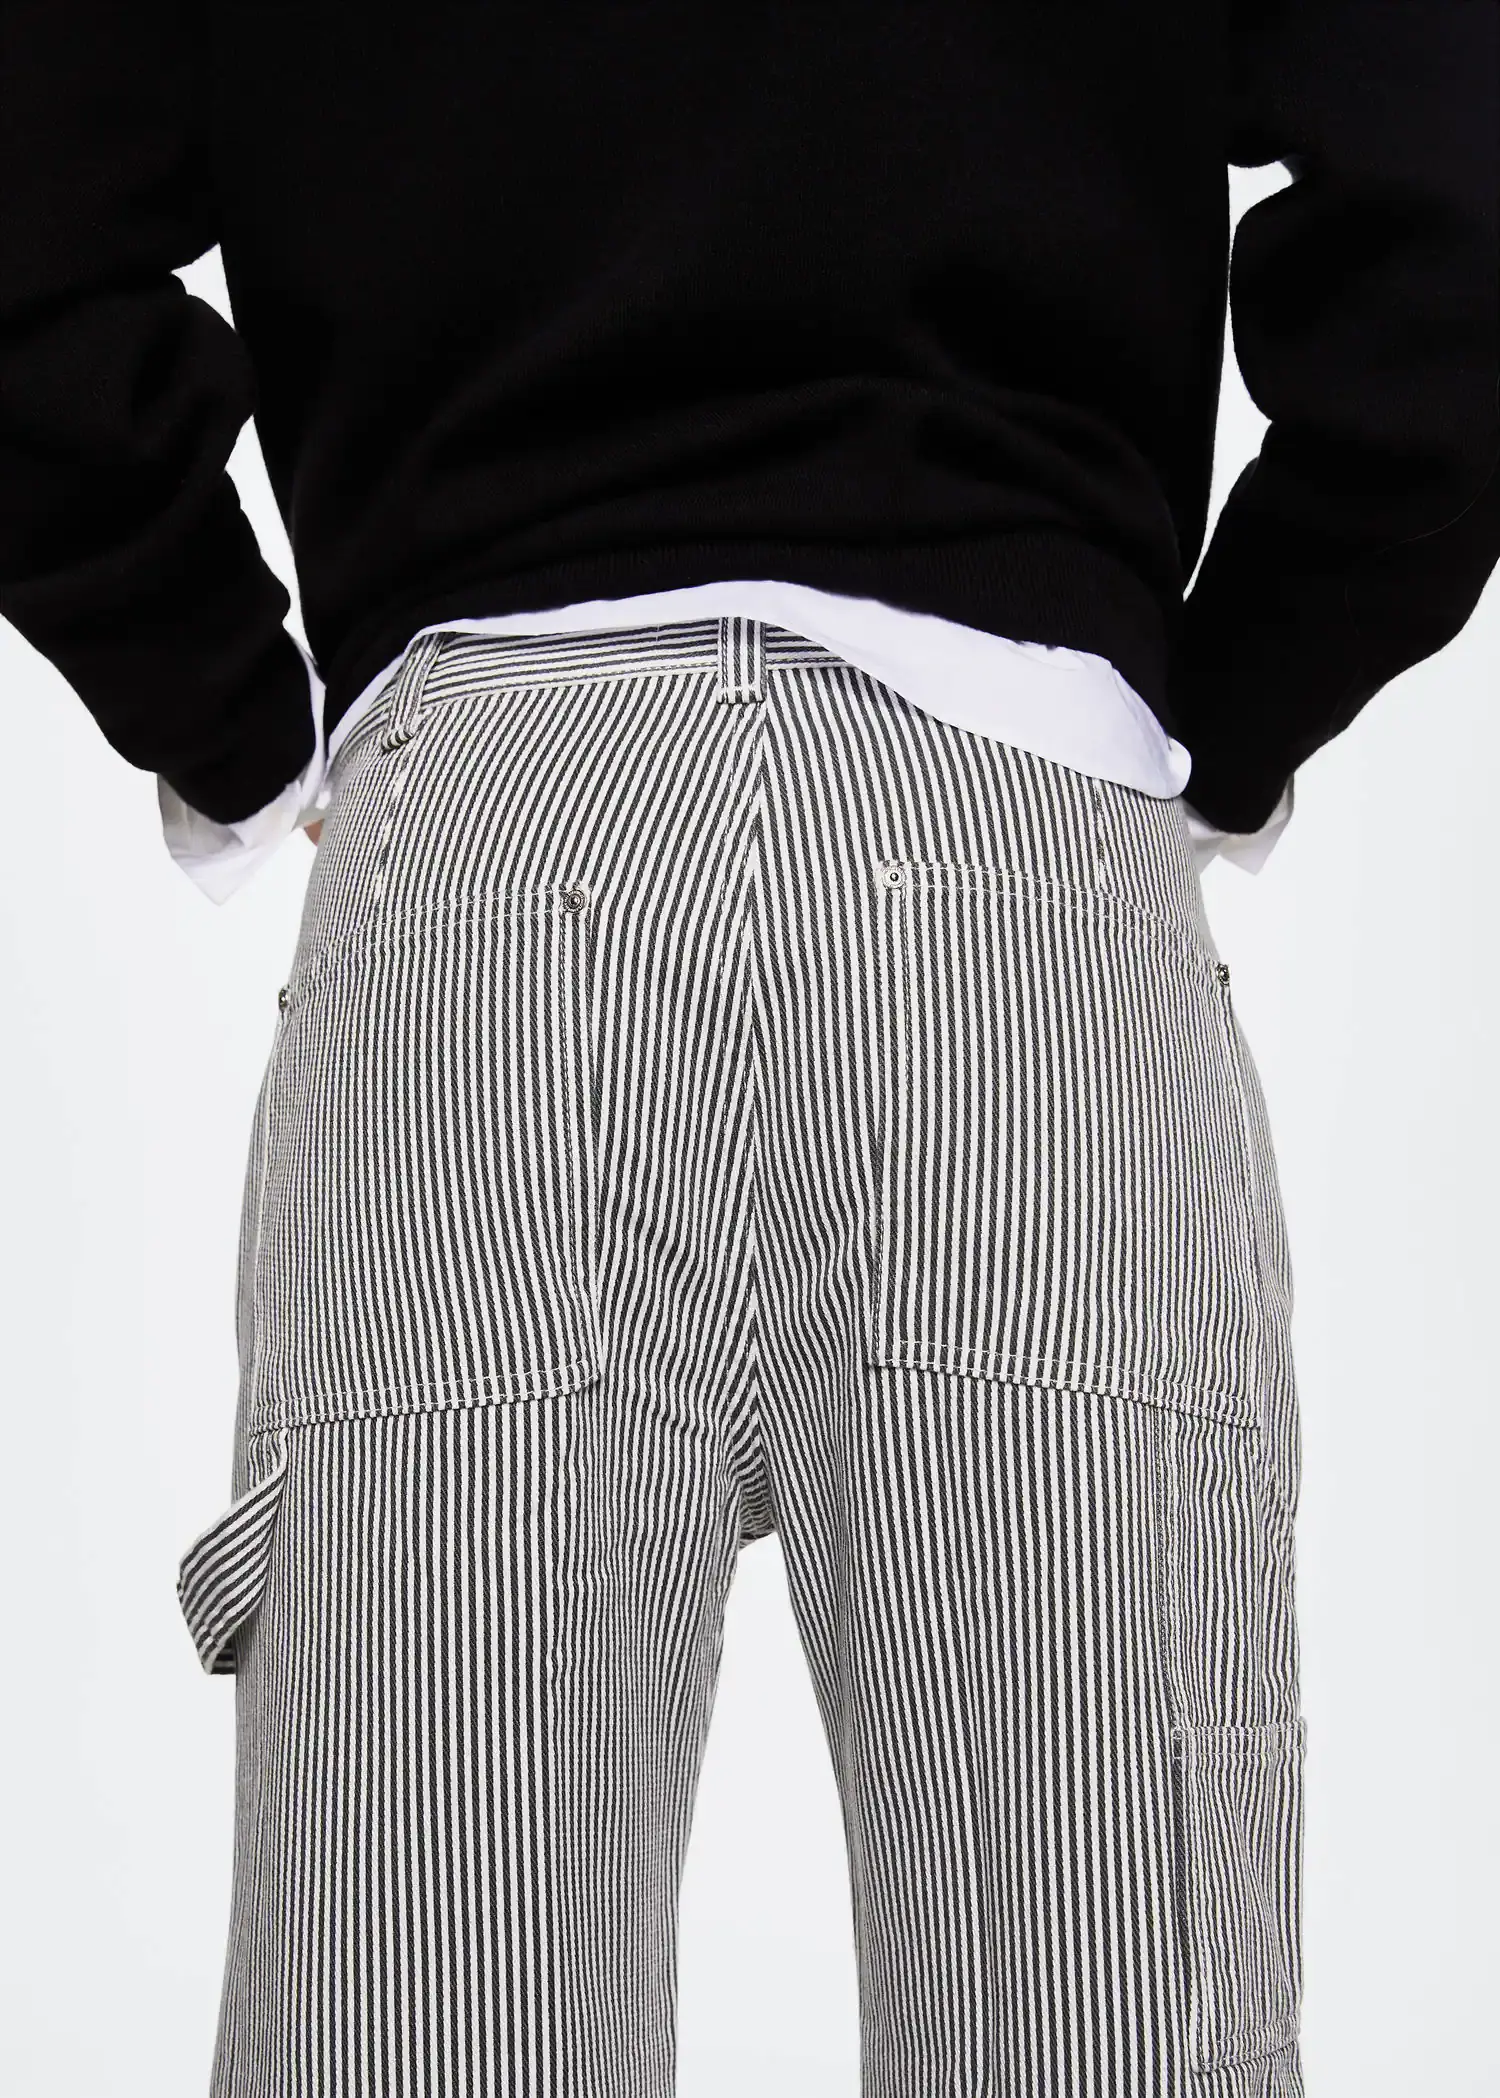 Mango Pocket cargo jeans. a person wearing a black and white striped shirt and pants. 